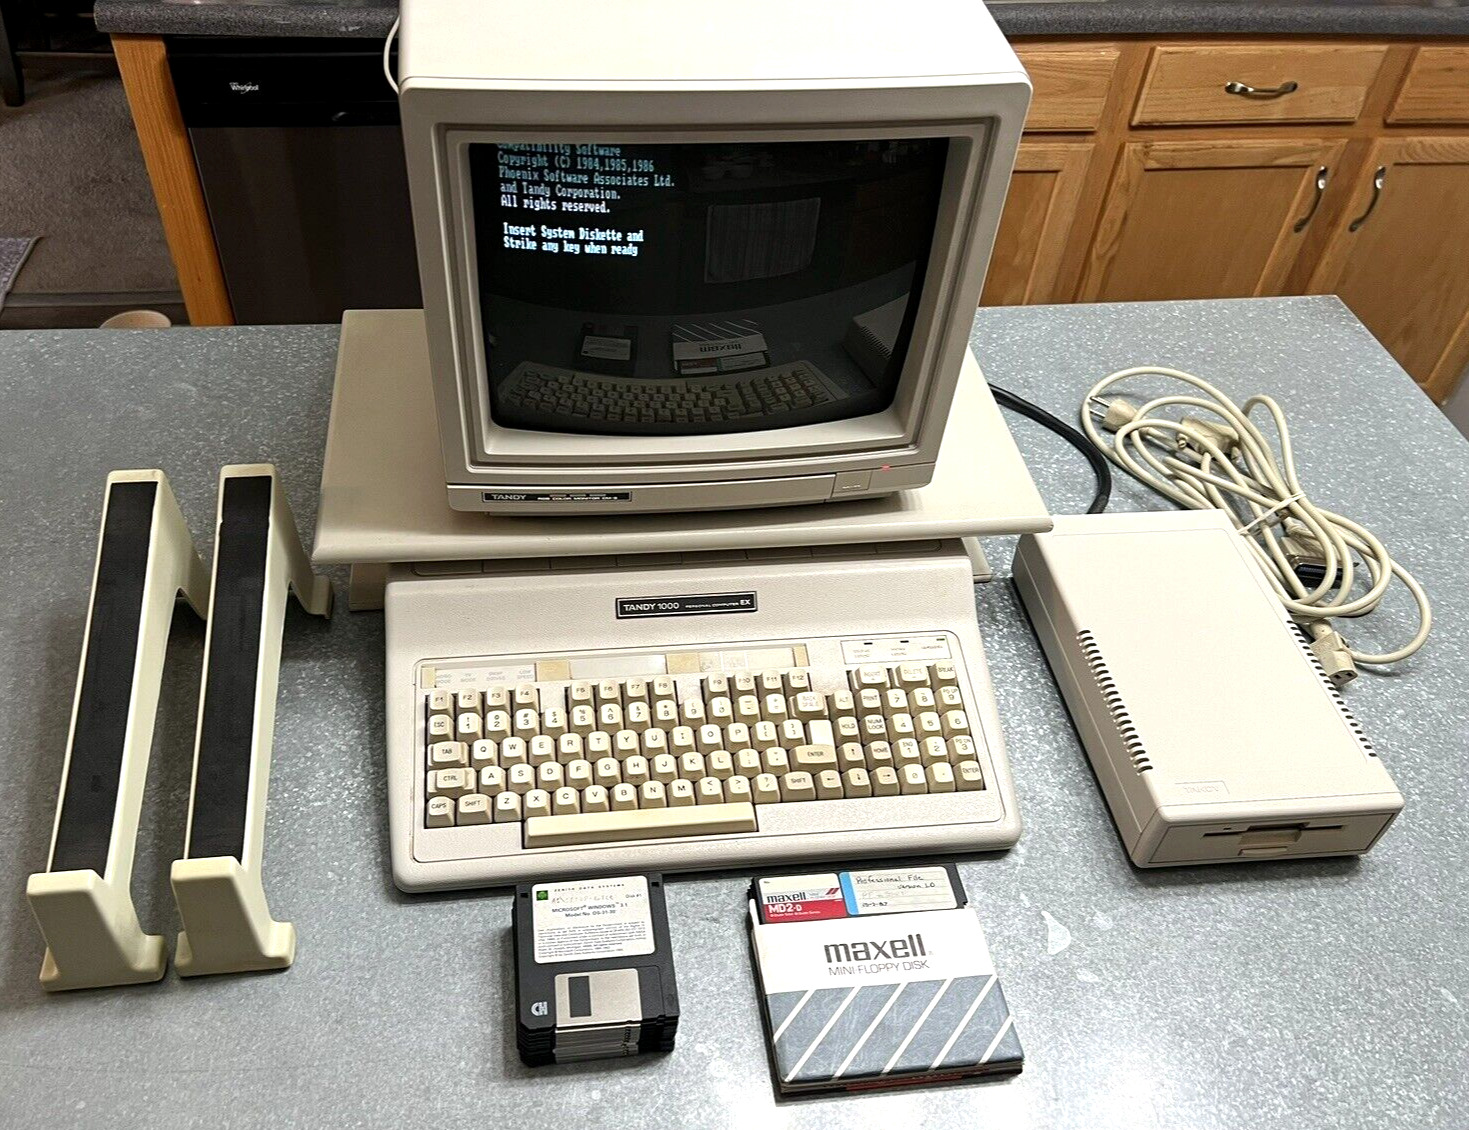 Tandy 1000EX Personal Computer w/Monitor, External Floppy Drive, Riser Powers On